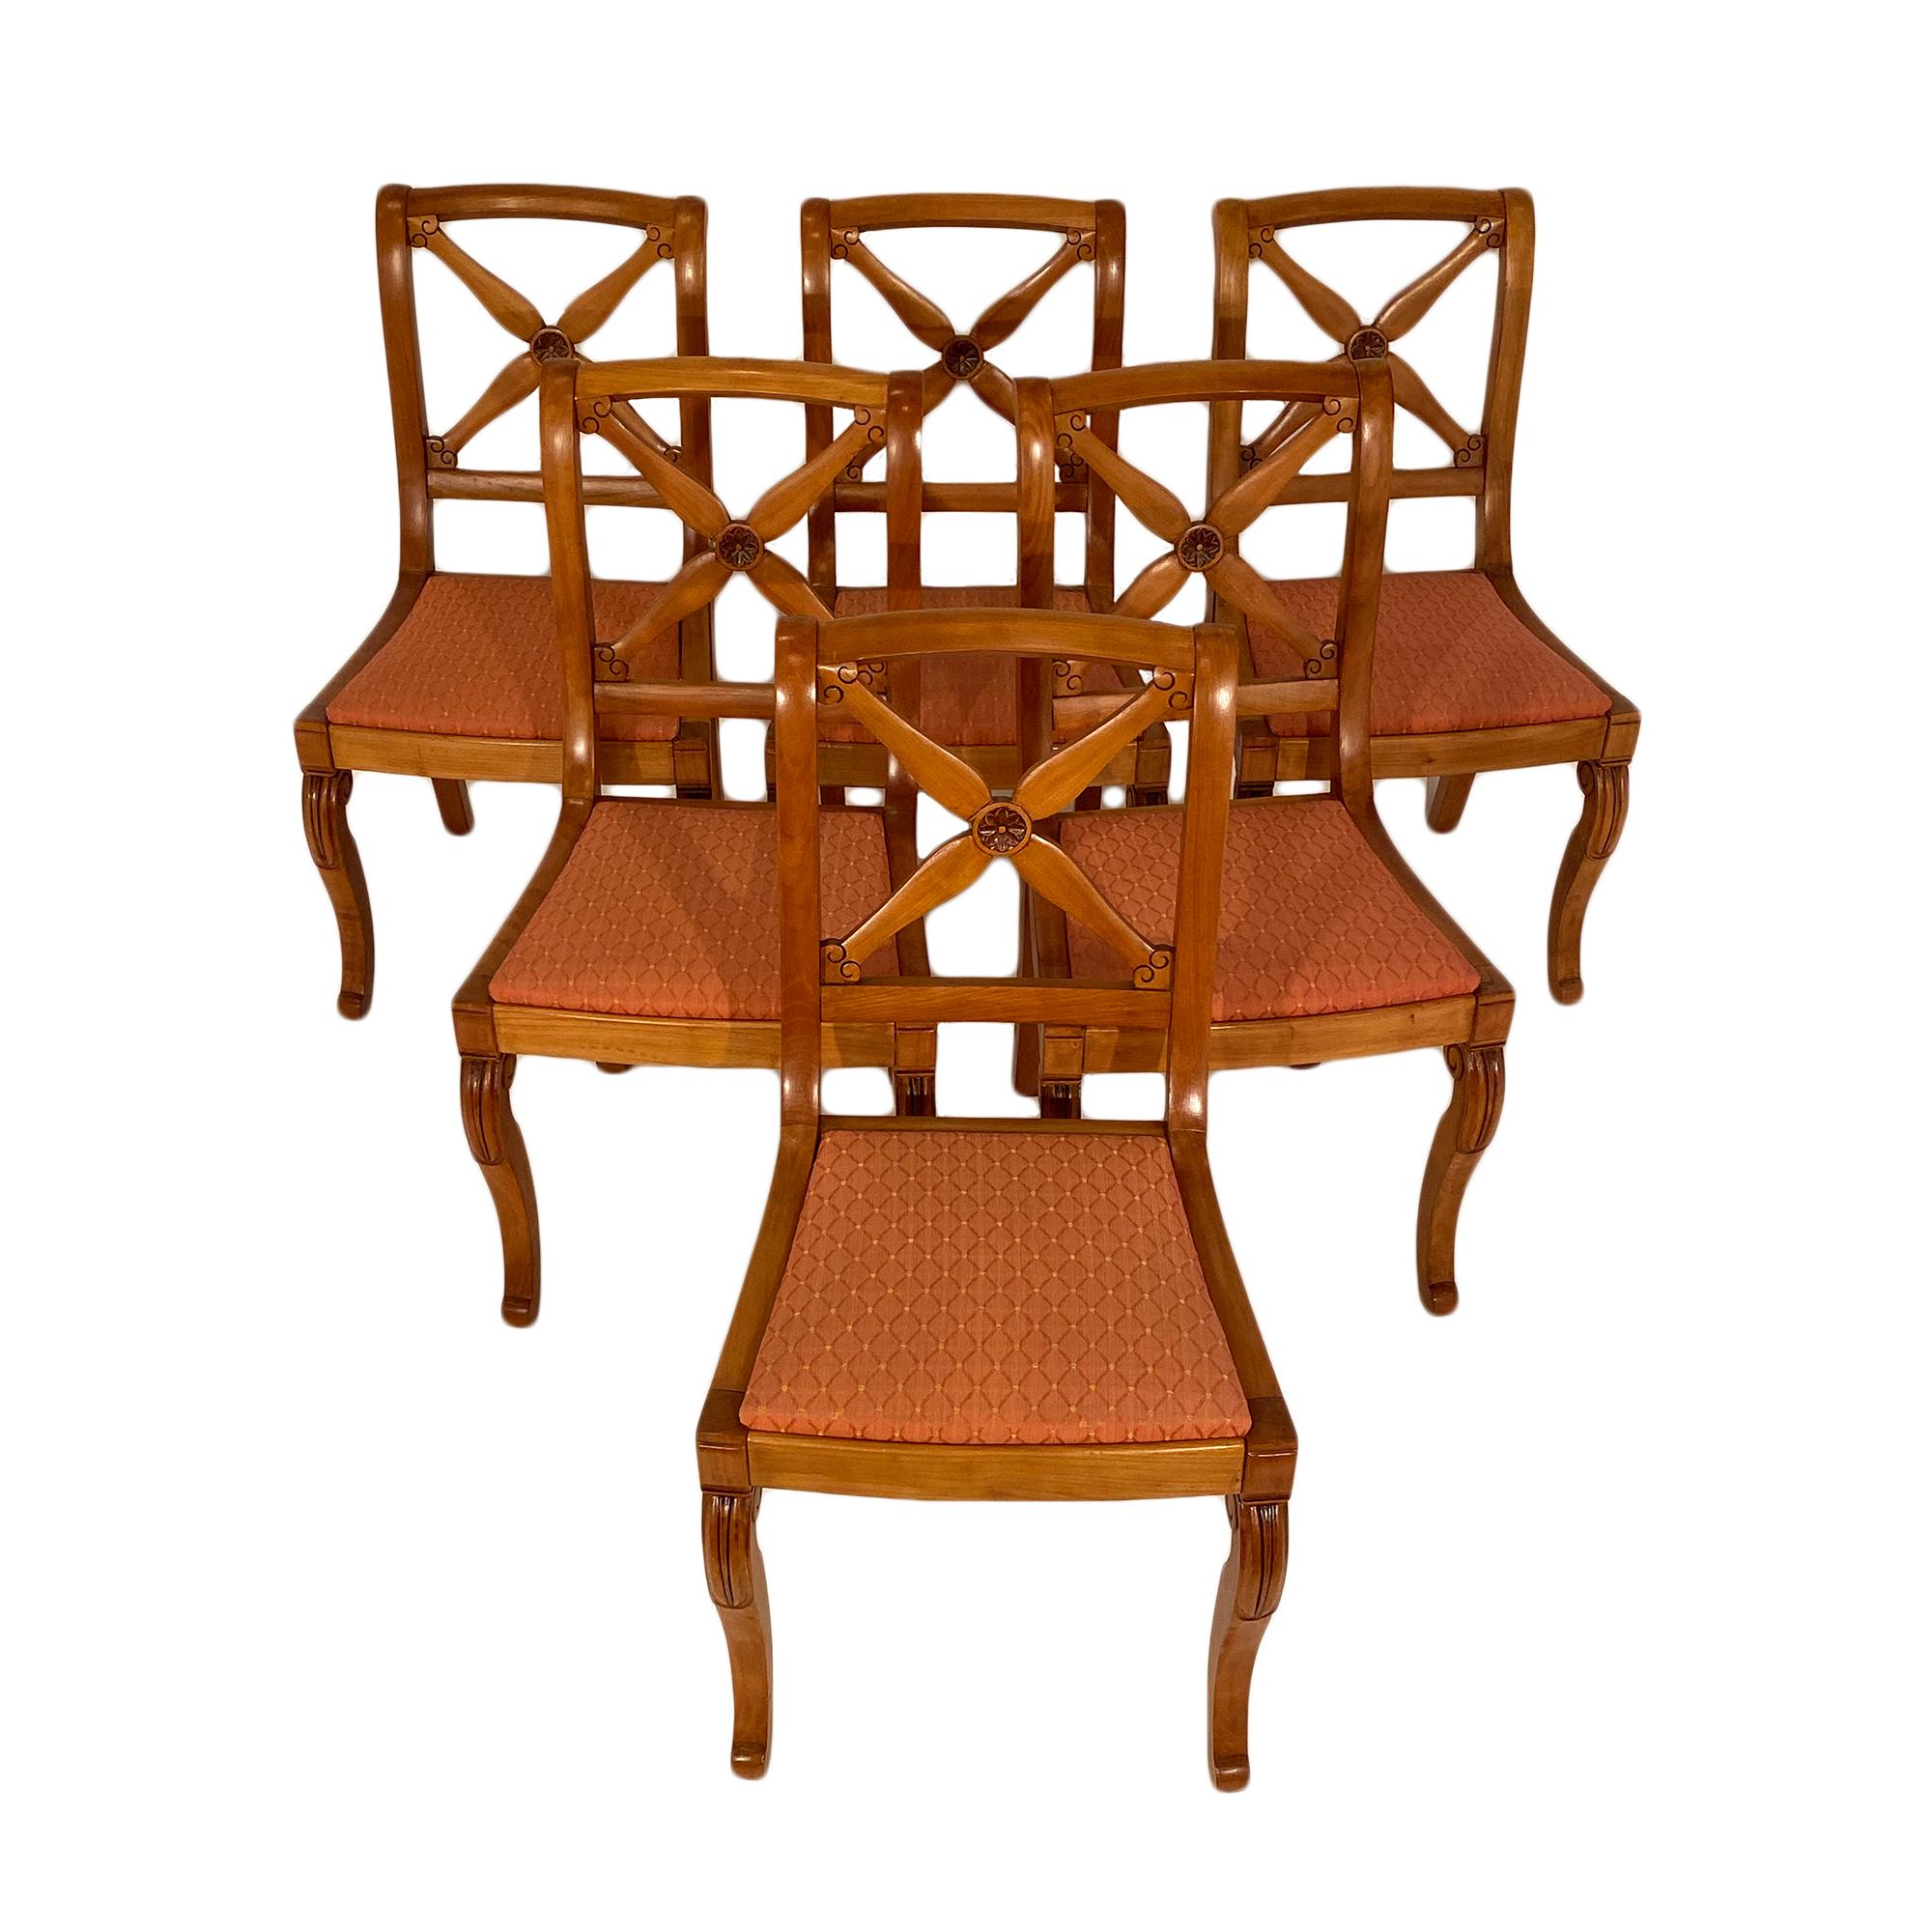 French Restoration dining chairs with additional two armchairs. All are made of hand carved cherrywood with very strong frames. They feature saber back legs and console front legs. The opened back is adorned with stylized crossing swords.

The